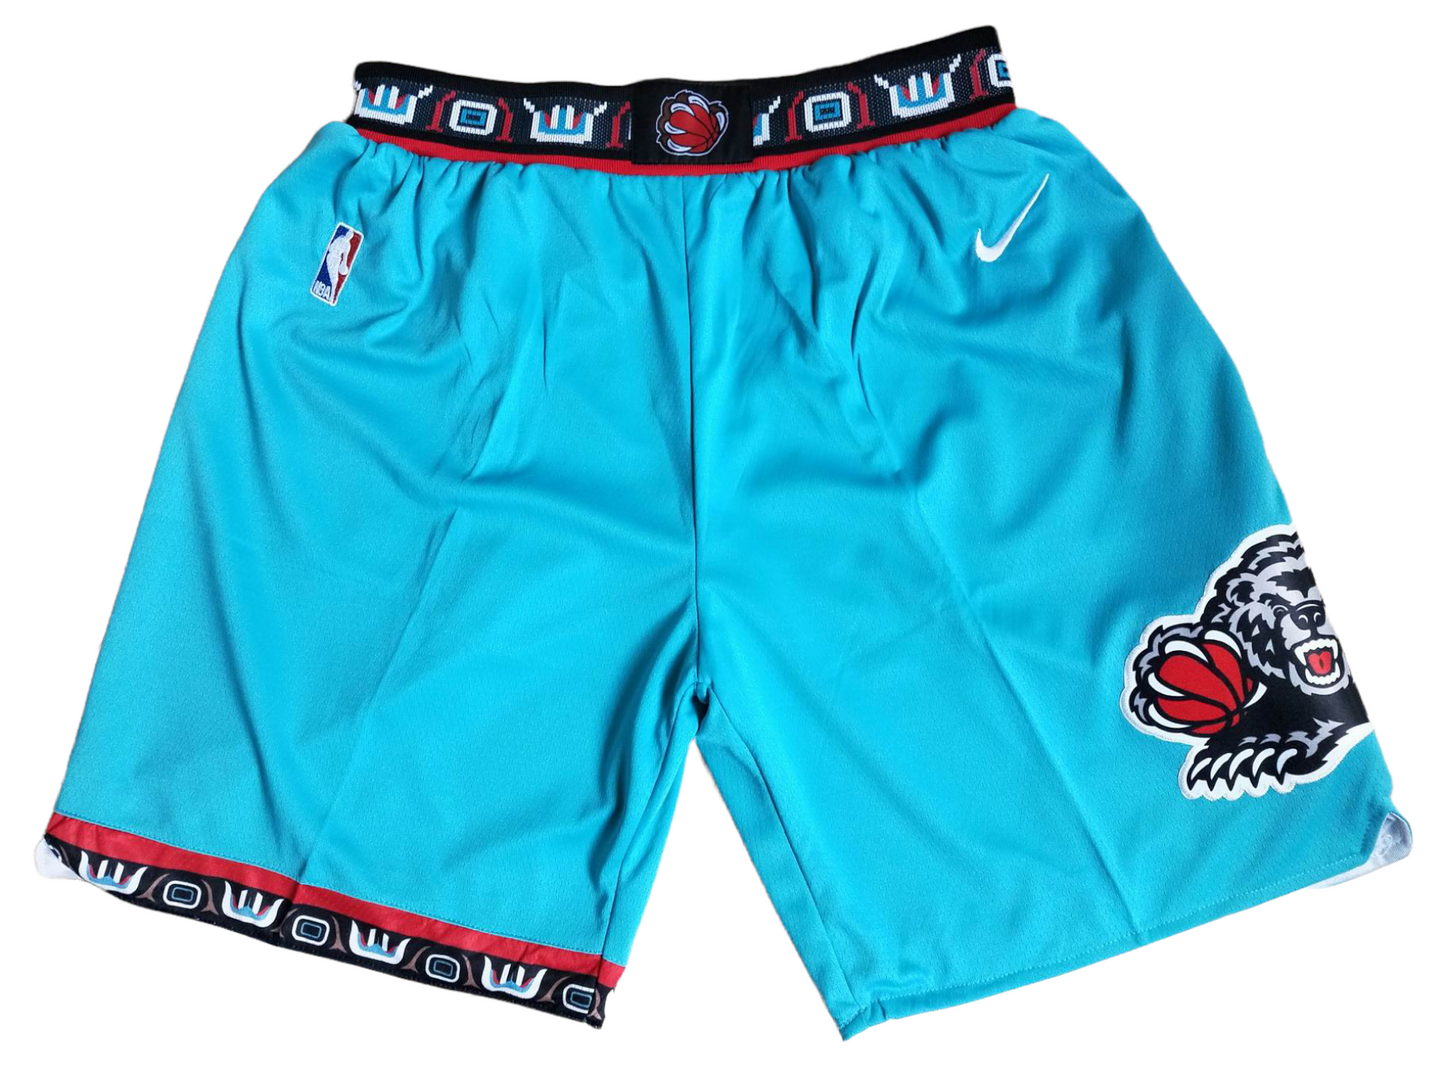 Vancouver Grizzlies Basketball Shorts